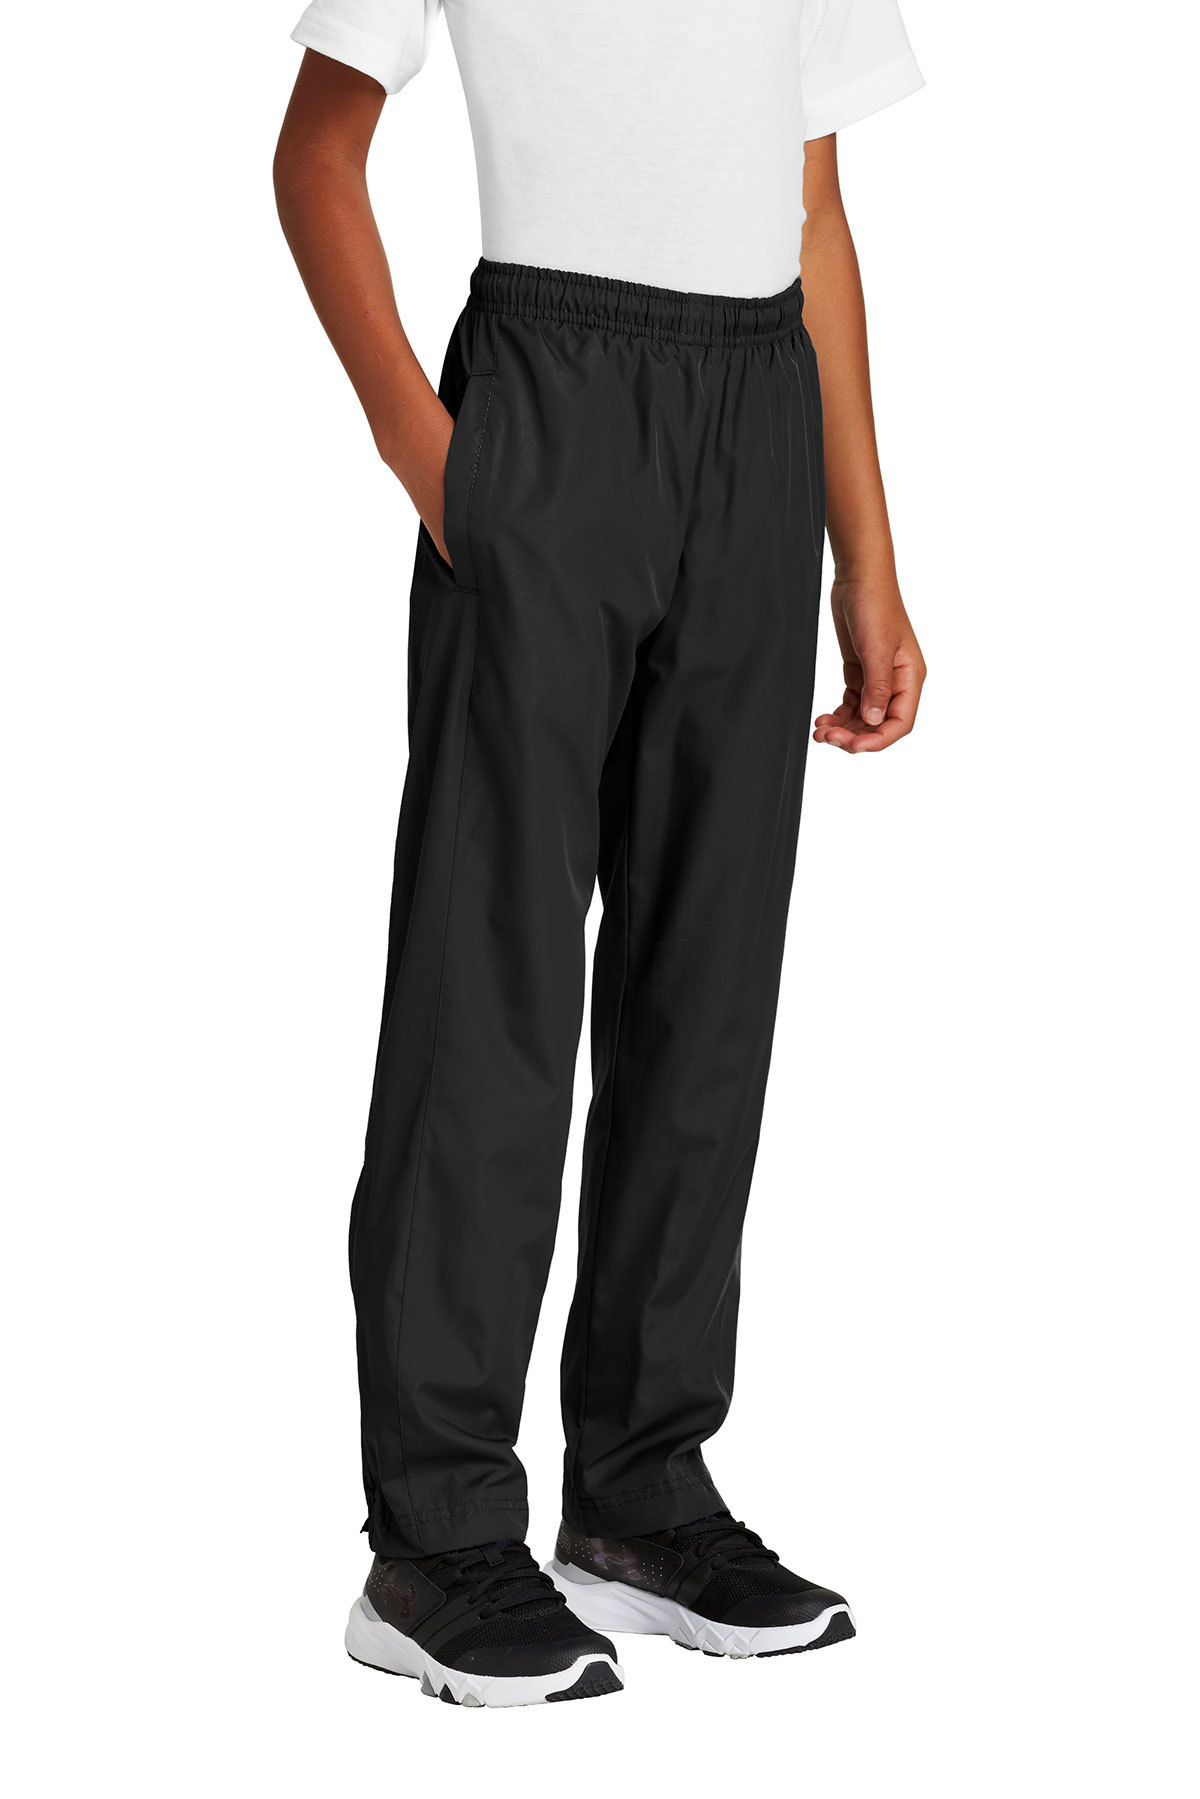 Sport-Tek Youth Wind Pant | Product | Company Casuals